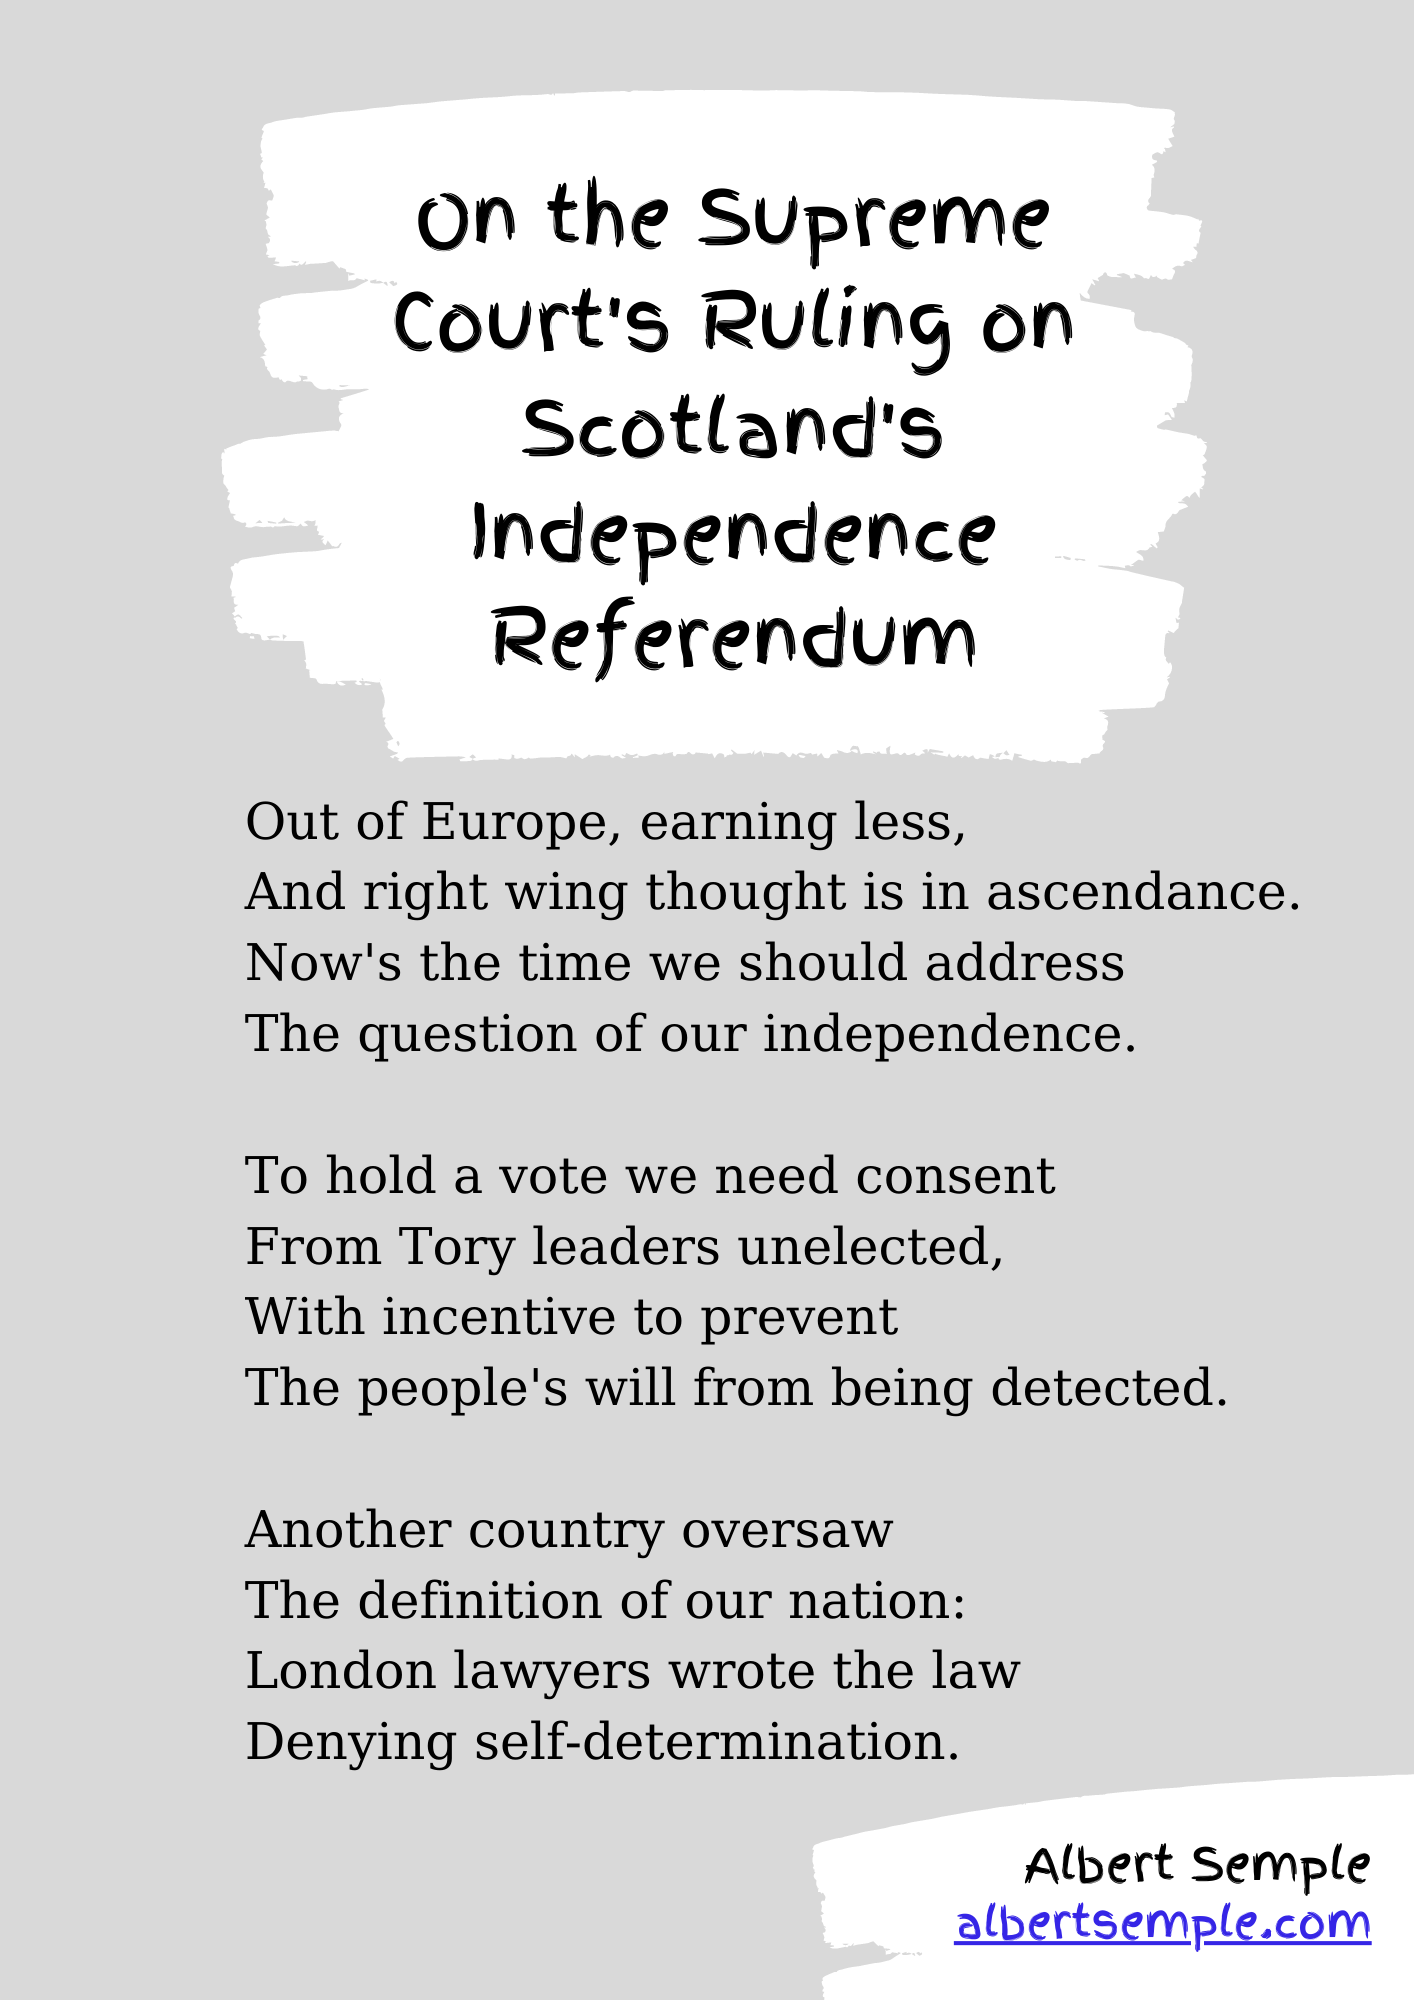 We're out of Europe, earning less,
And right-wing thought is in ascendance.
Now's the time we should address
The question of our independence.
To hold a vote we need consent
From Tory leaders unelected,
With incentive to prevent
The people's will from being effected.
Another country oversaw
The definition of our nation:
London lawyers wrote the law
Denying self-determination.